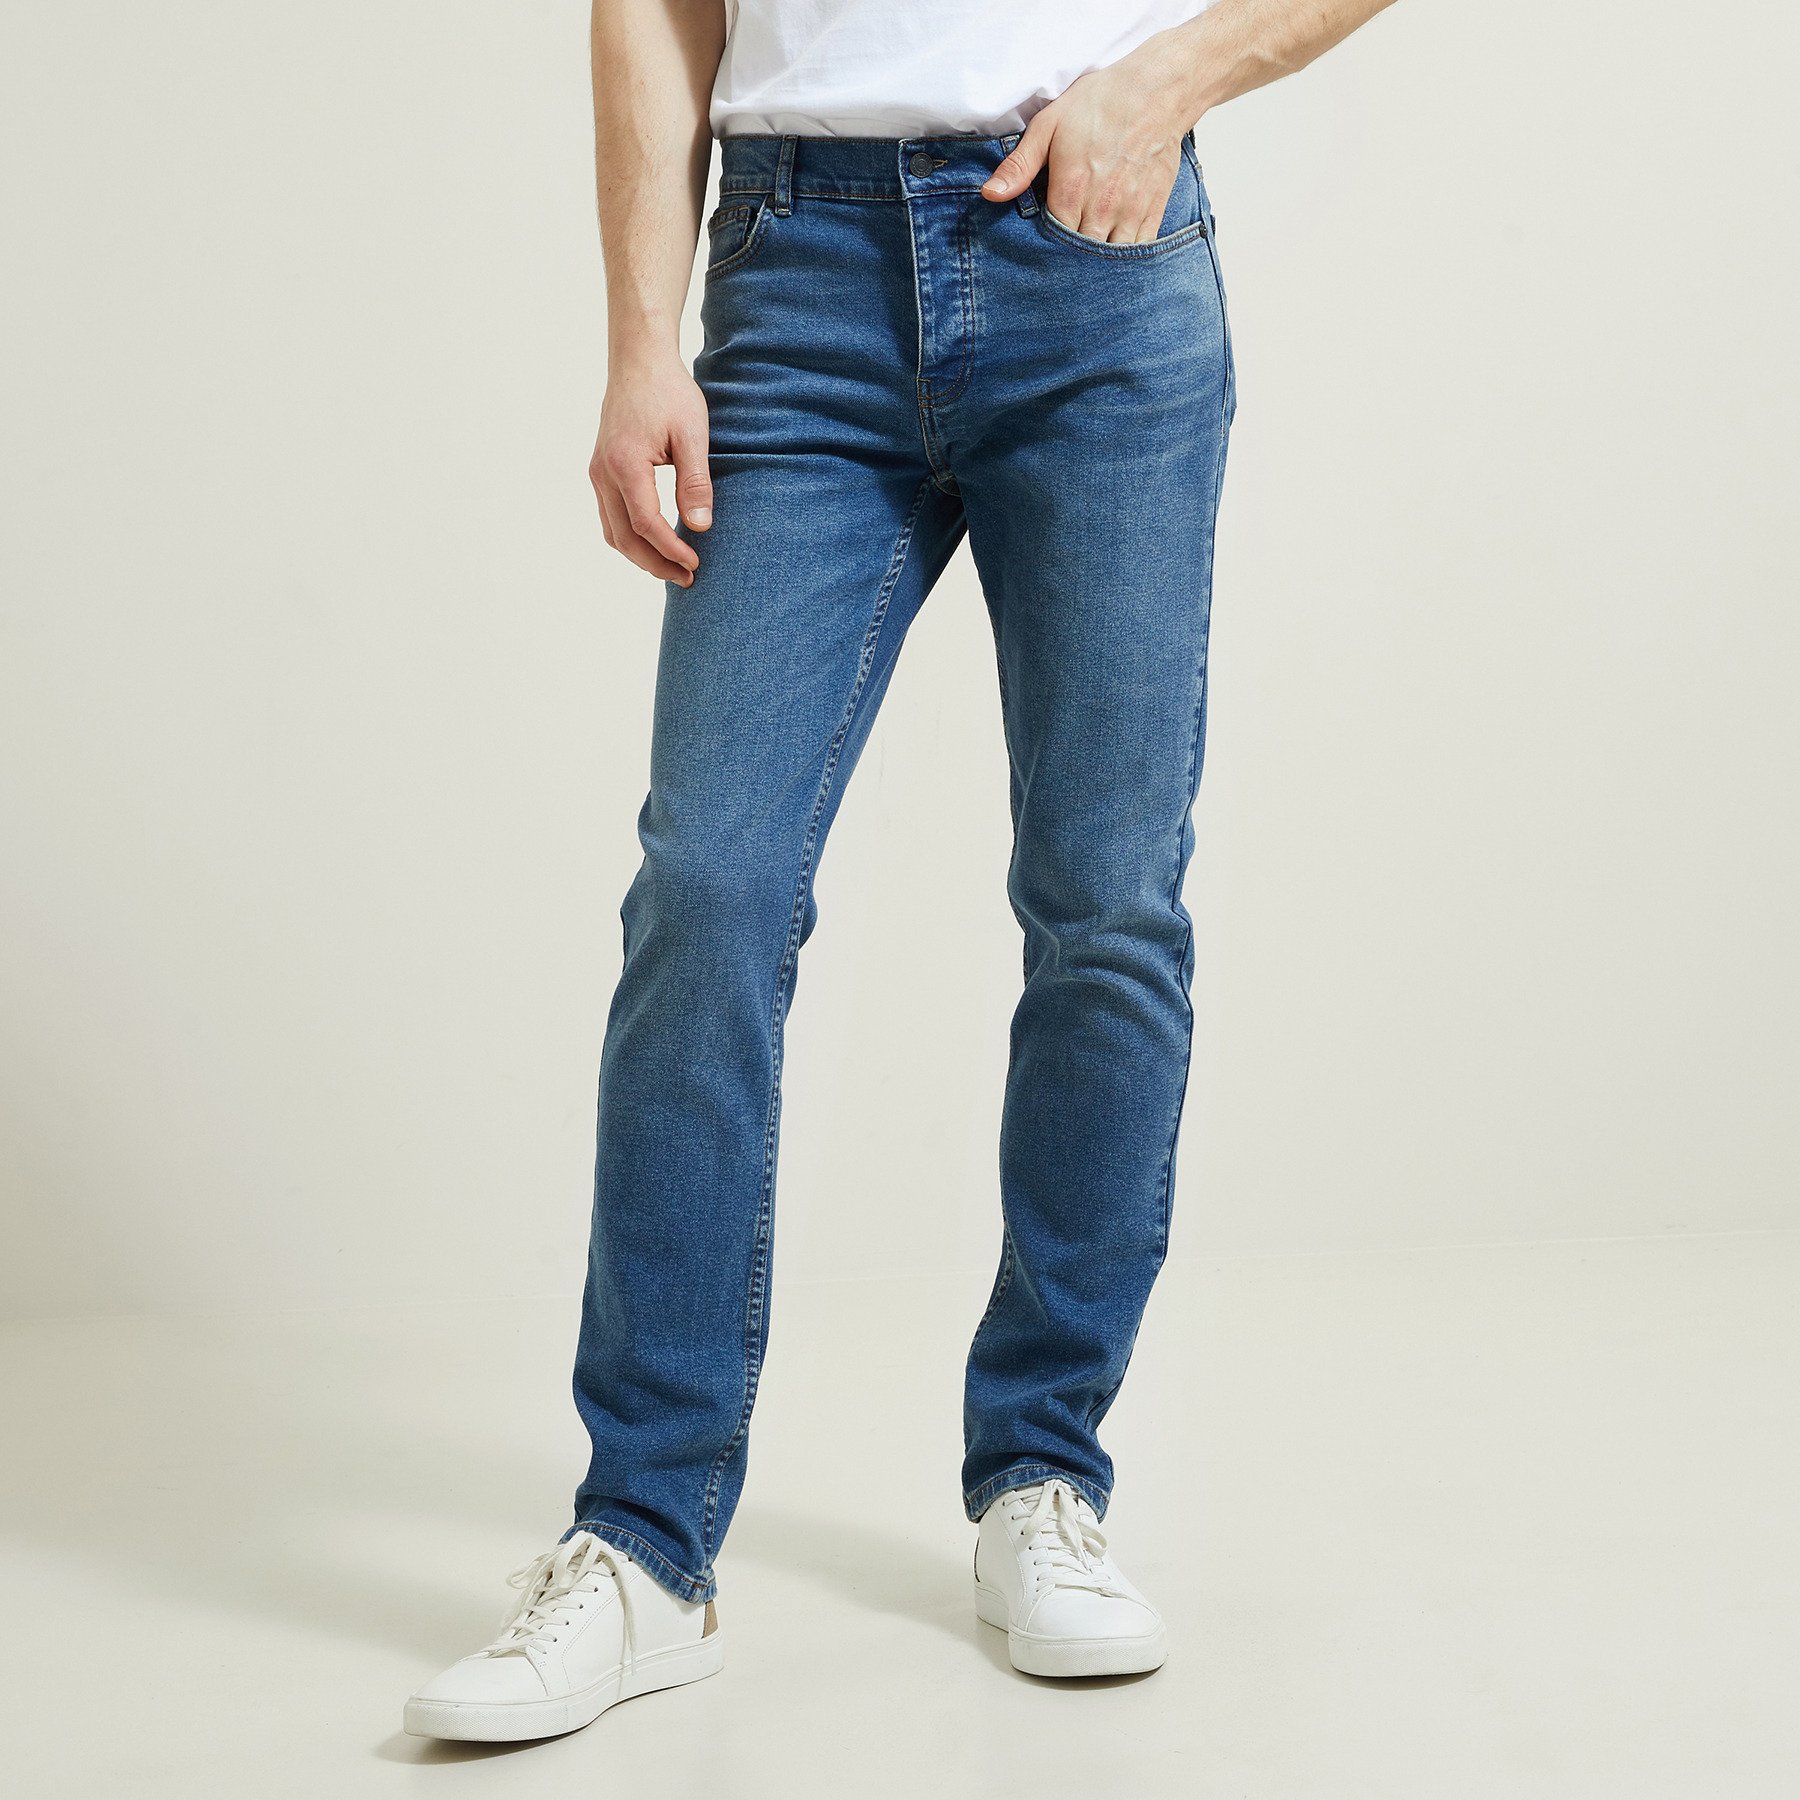 Jean straight circulaire by JULES Bleu 36 98% Coton, 2% Elasthanne Homme